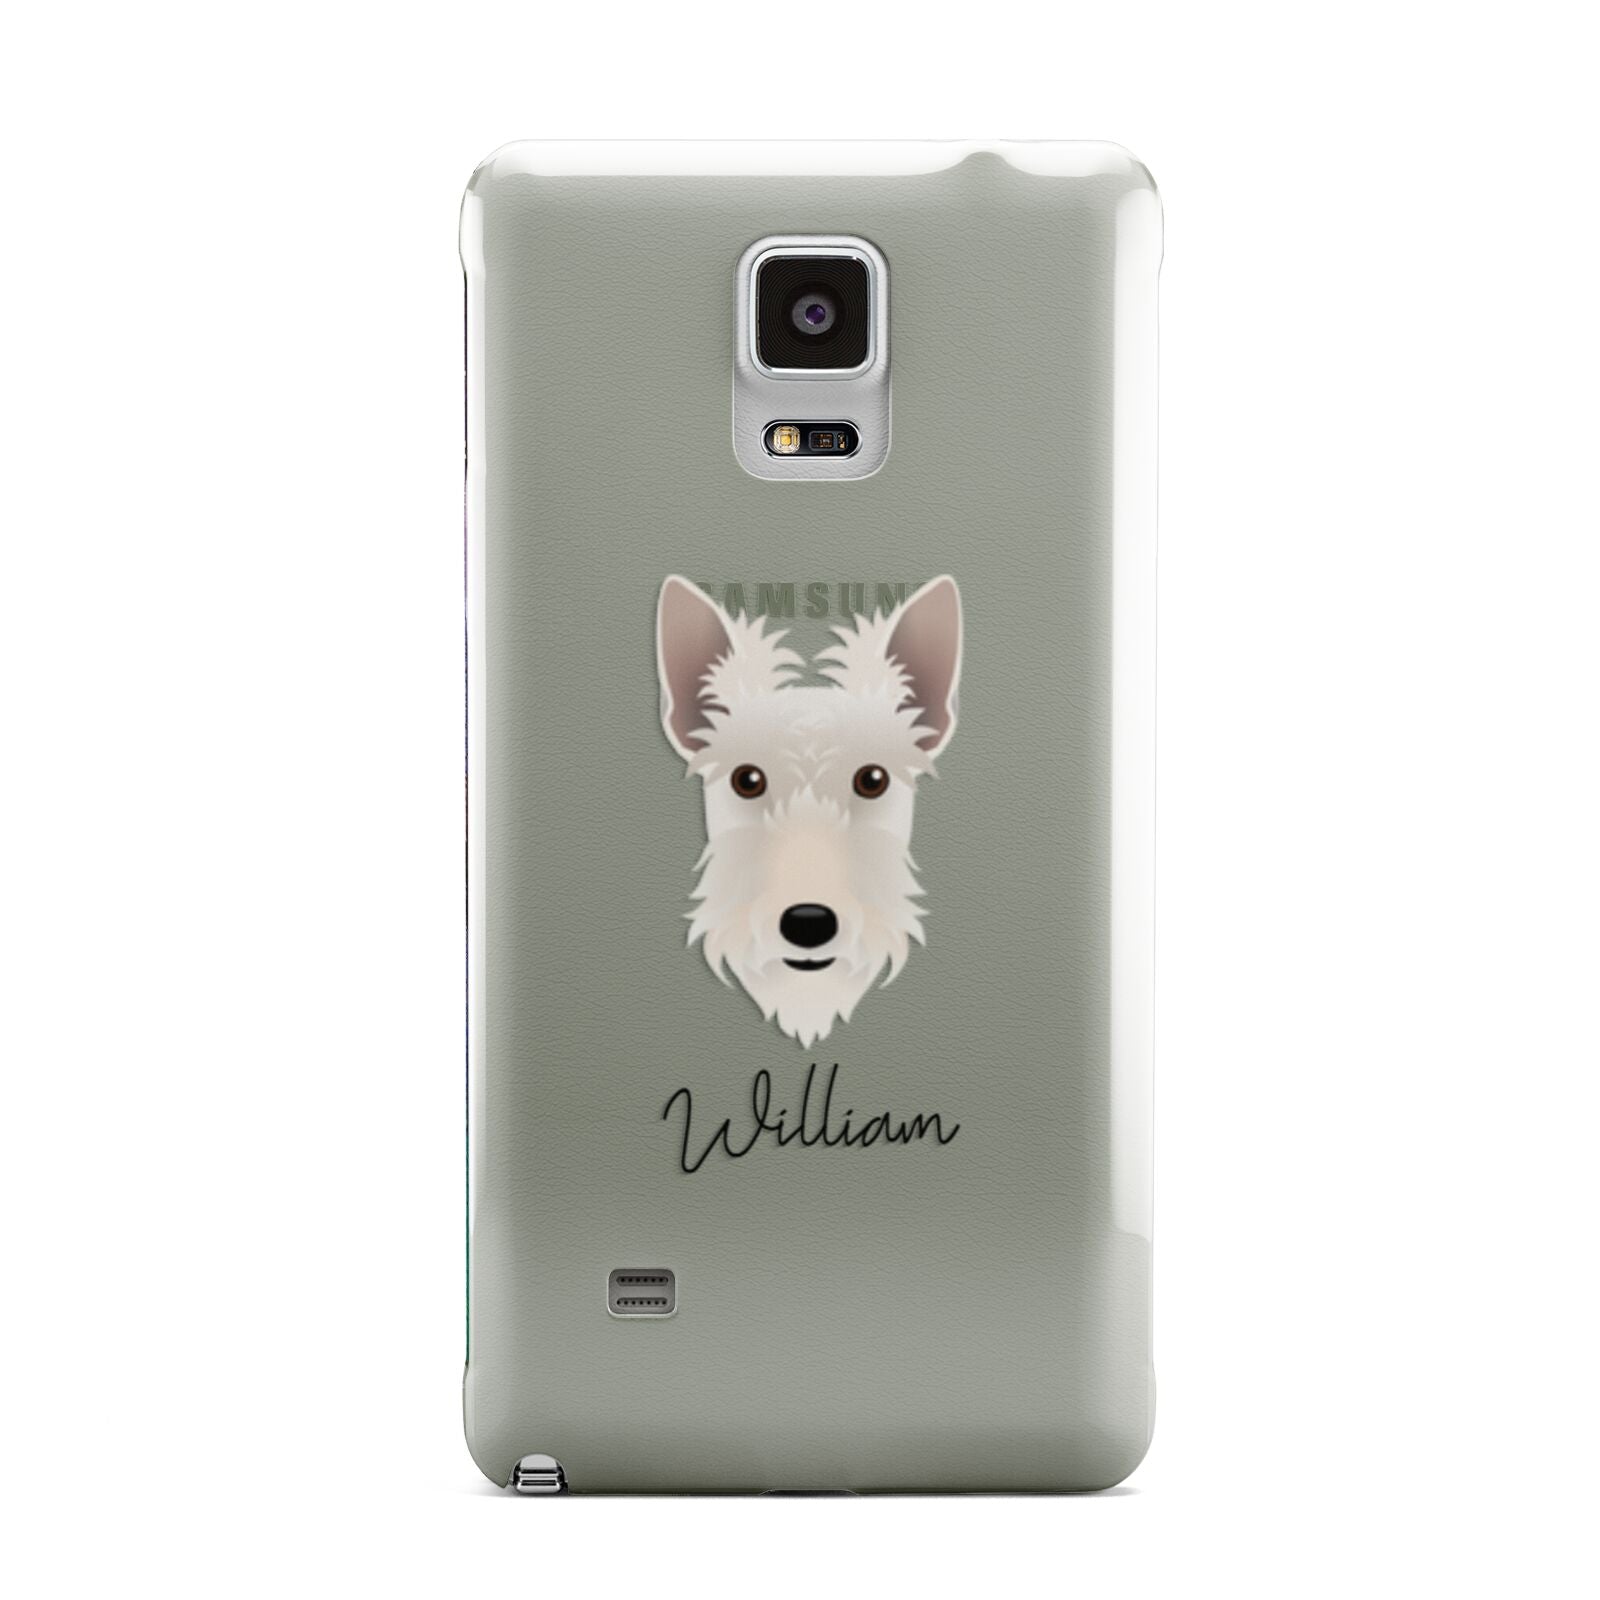 Scottish Terrier Personalised Samsung Galaxy Note 4 Case